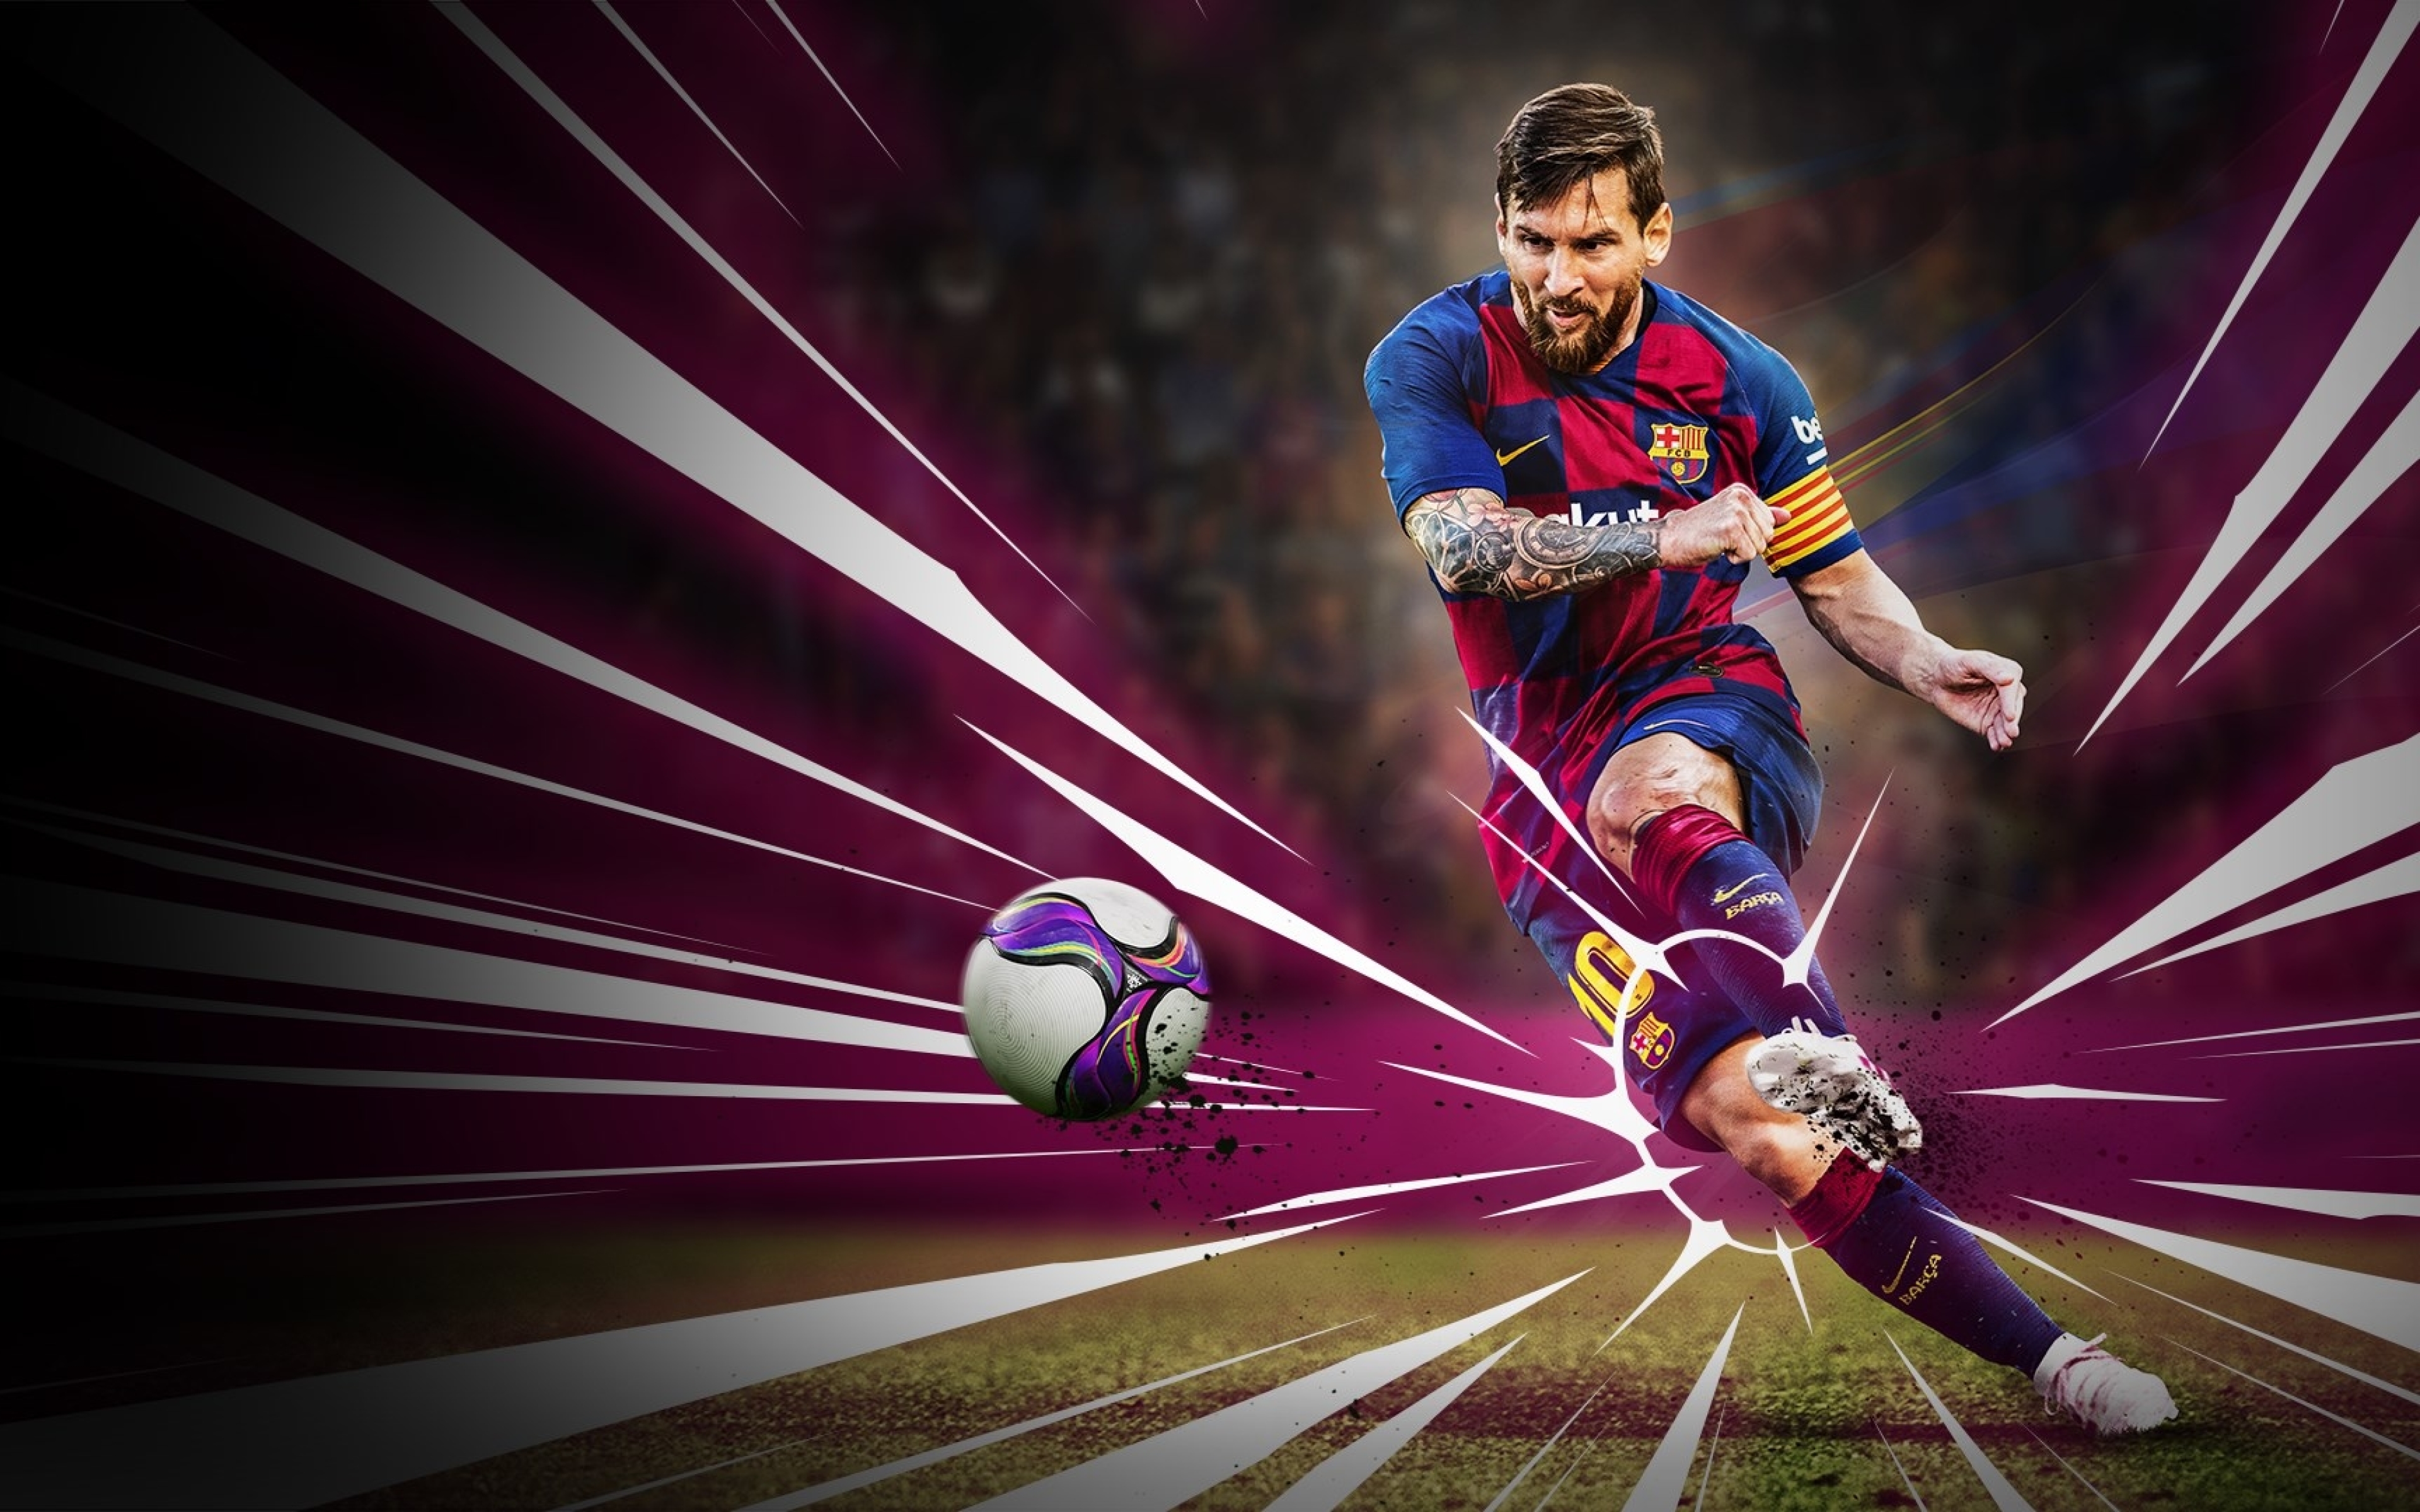  Lionel Messi 4k Wallpapers Photos Pictures WhatsApp Status DP Images hd  Free Download